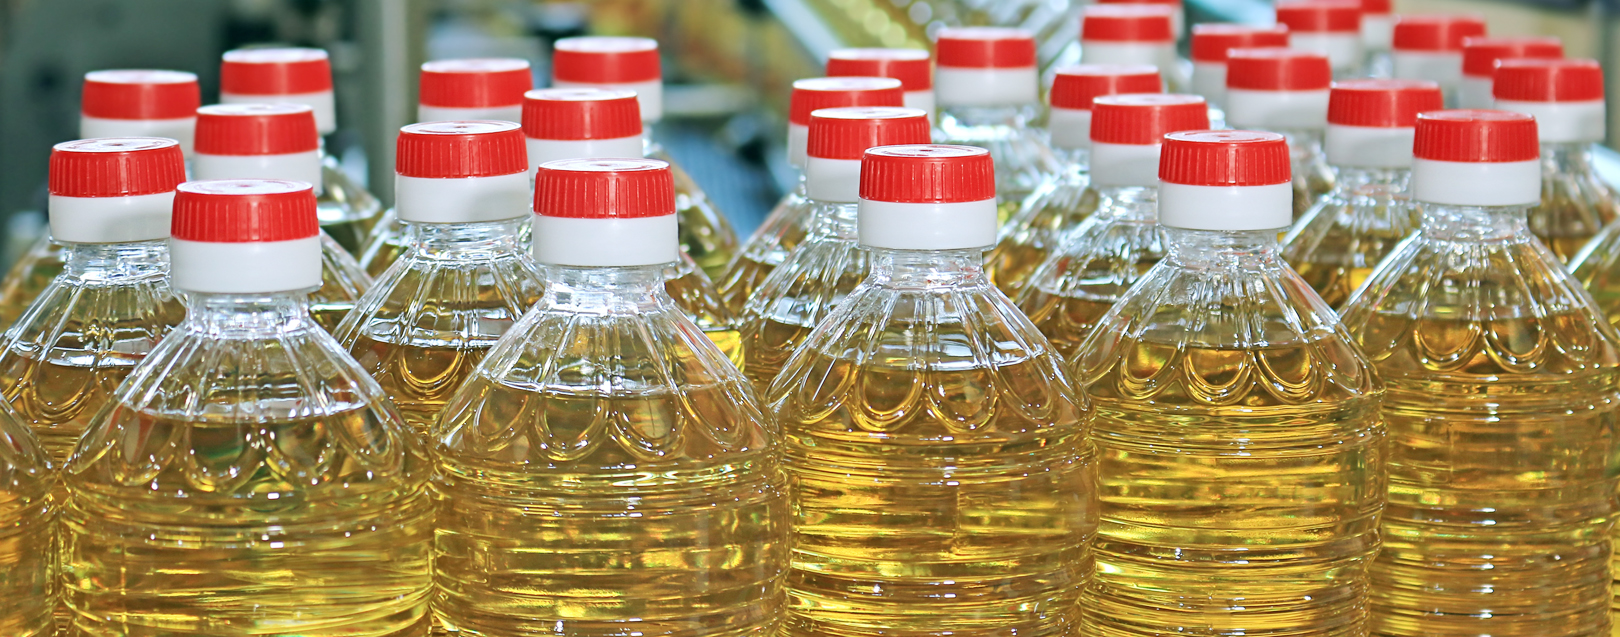 Govt raises import duty on edible oils to boost local prices